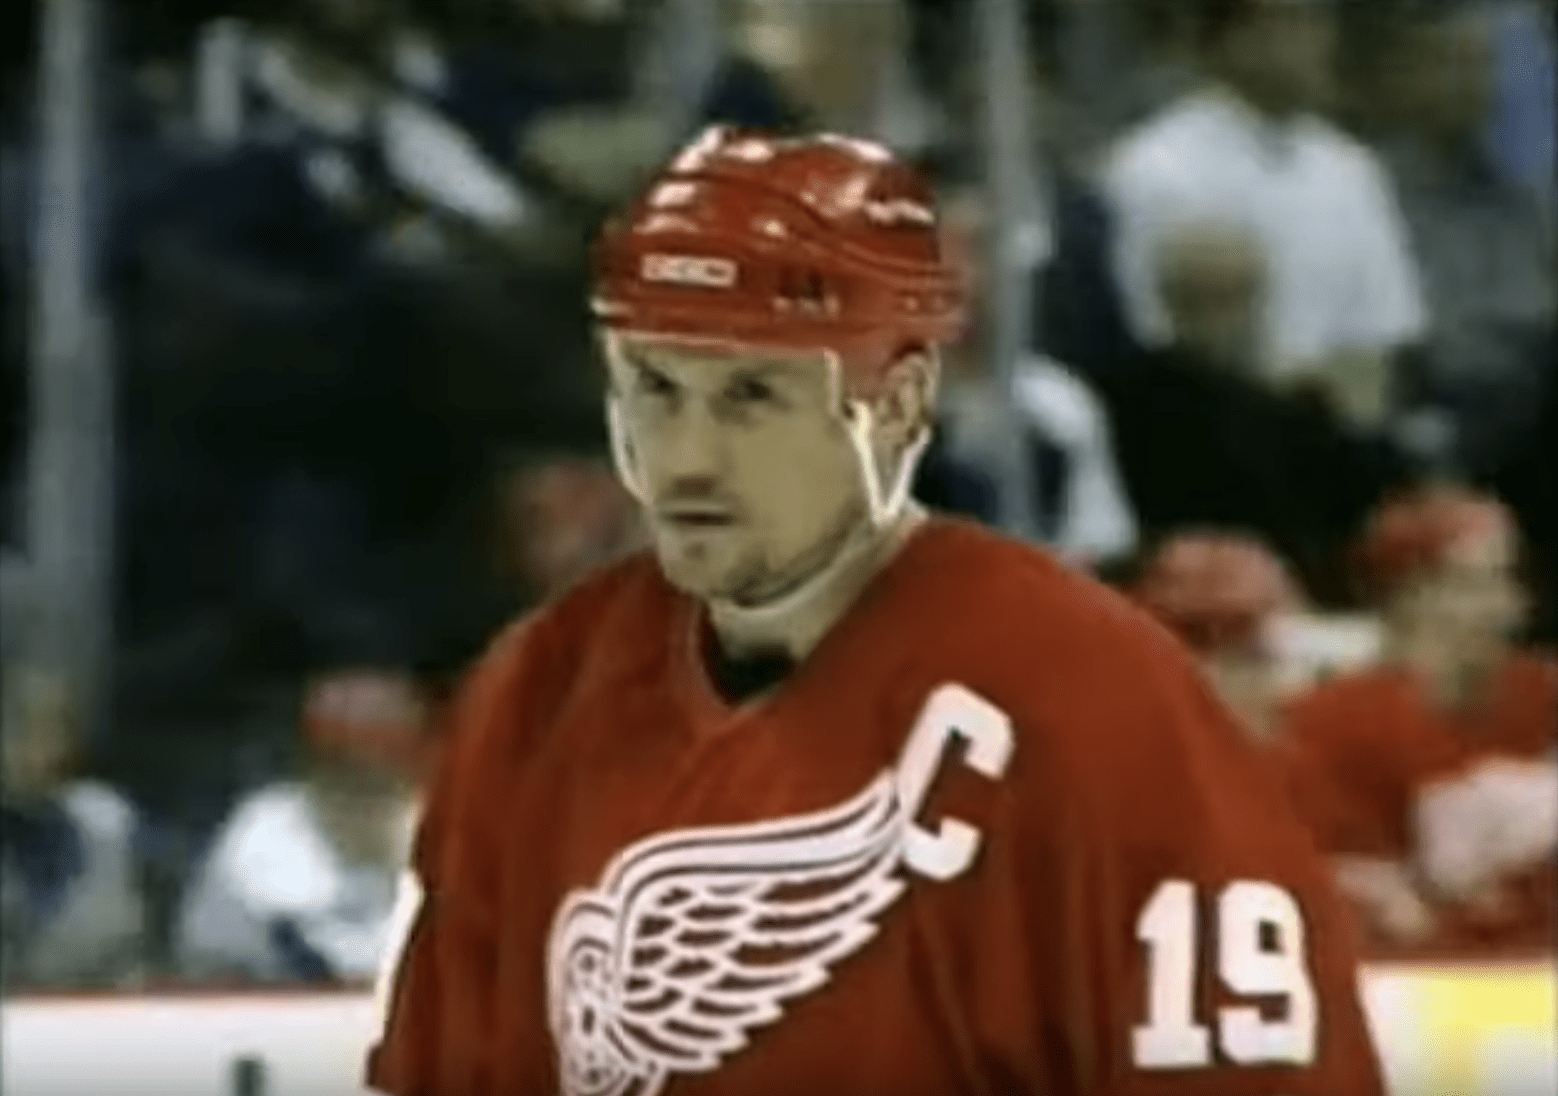 Former Red Wing Steve Yzerman pays tribute to his hockey idol